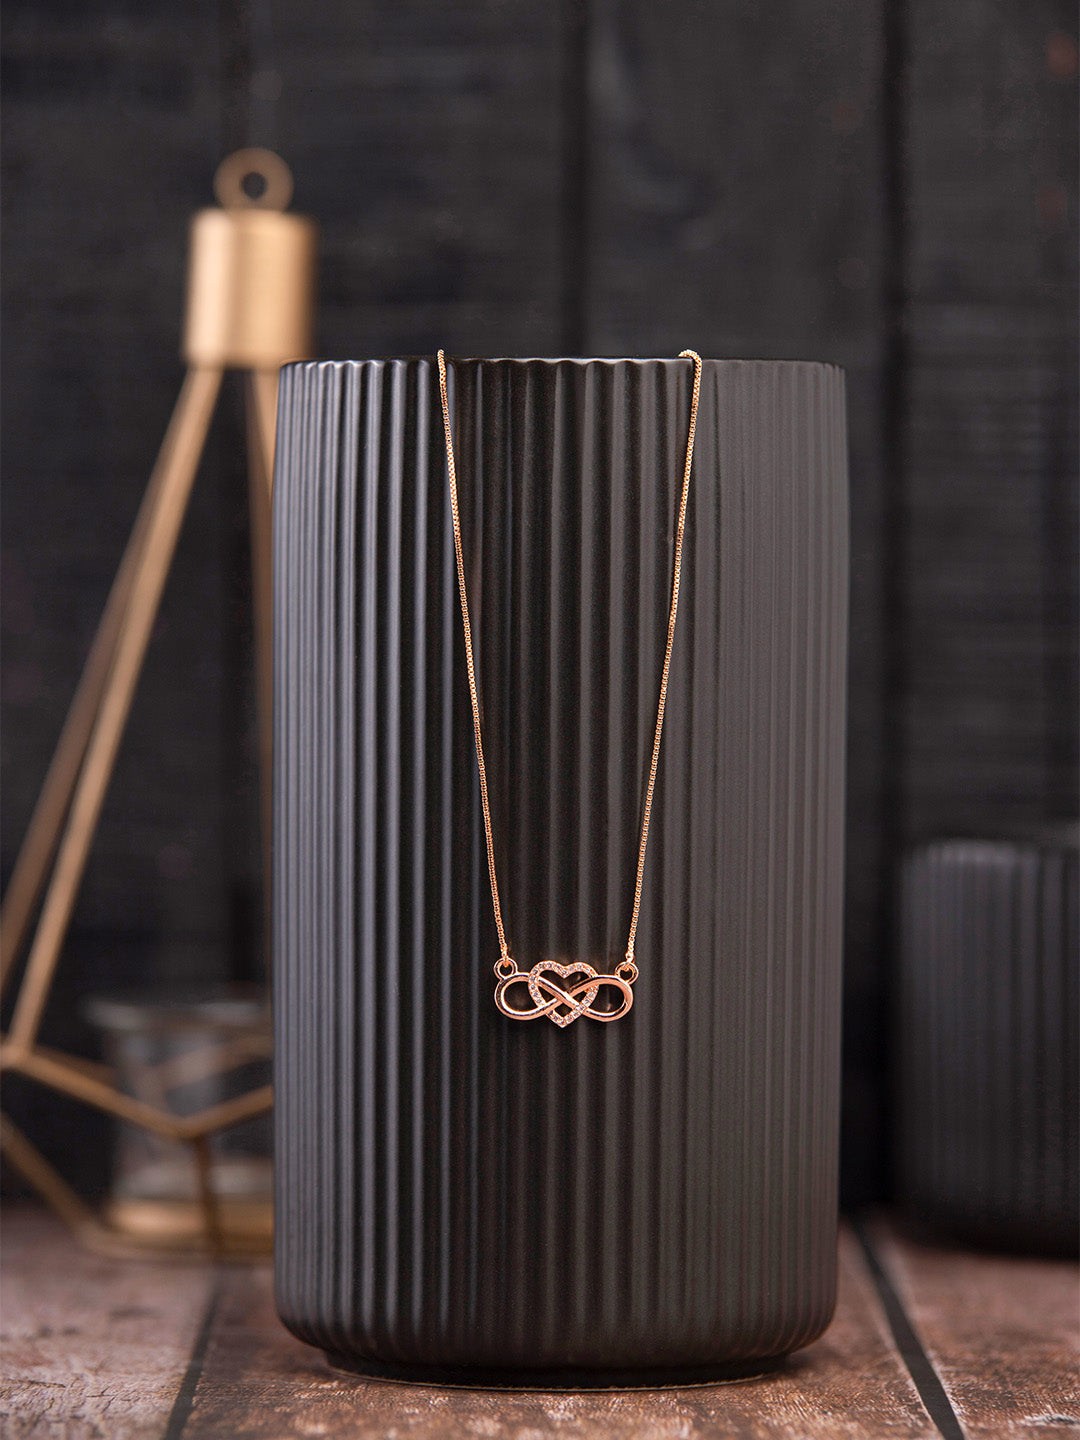 Prita by Priyaasi Rose Gold Studded Infinity-Heart Necklace